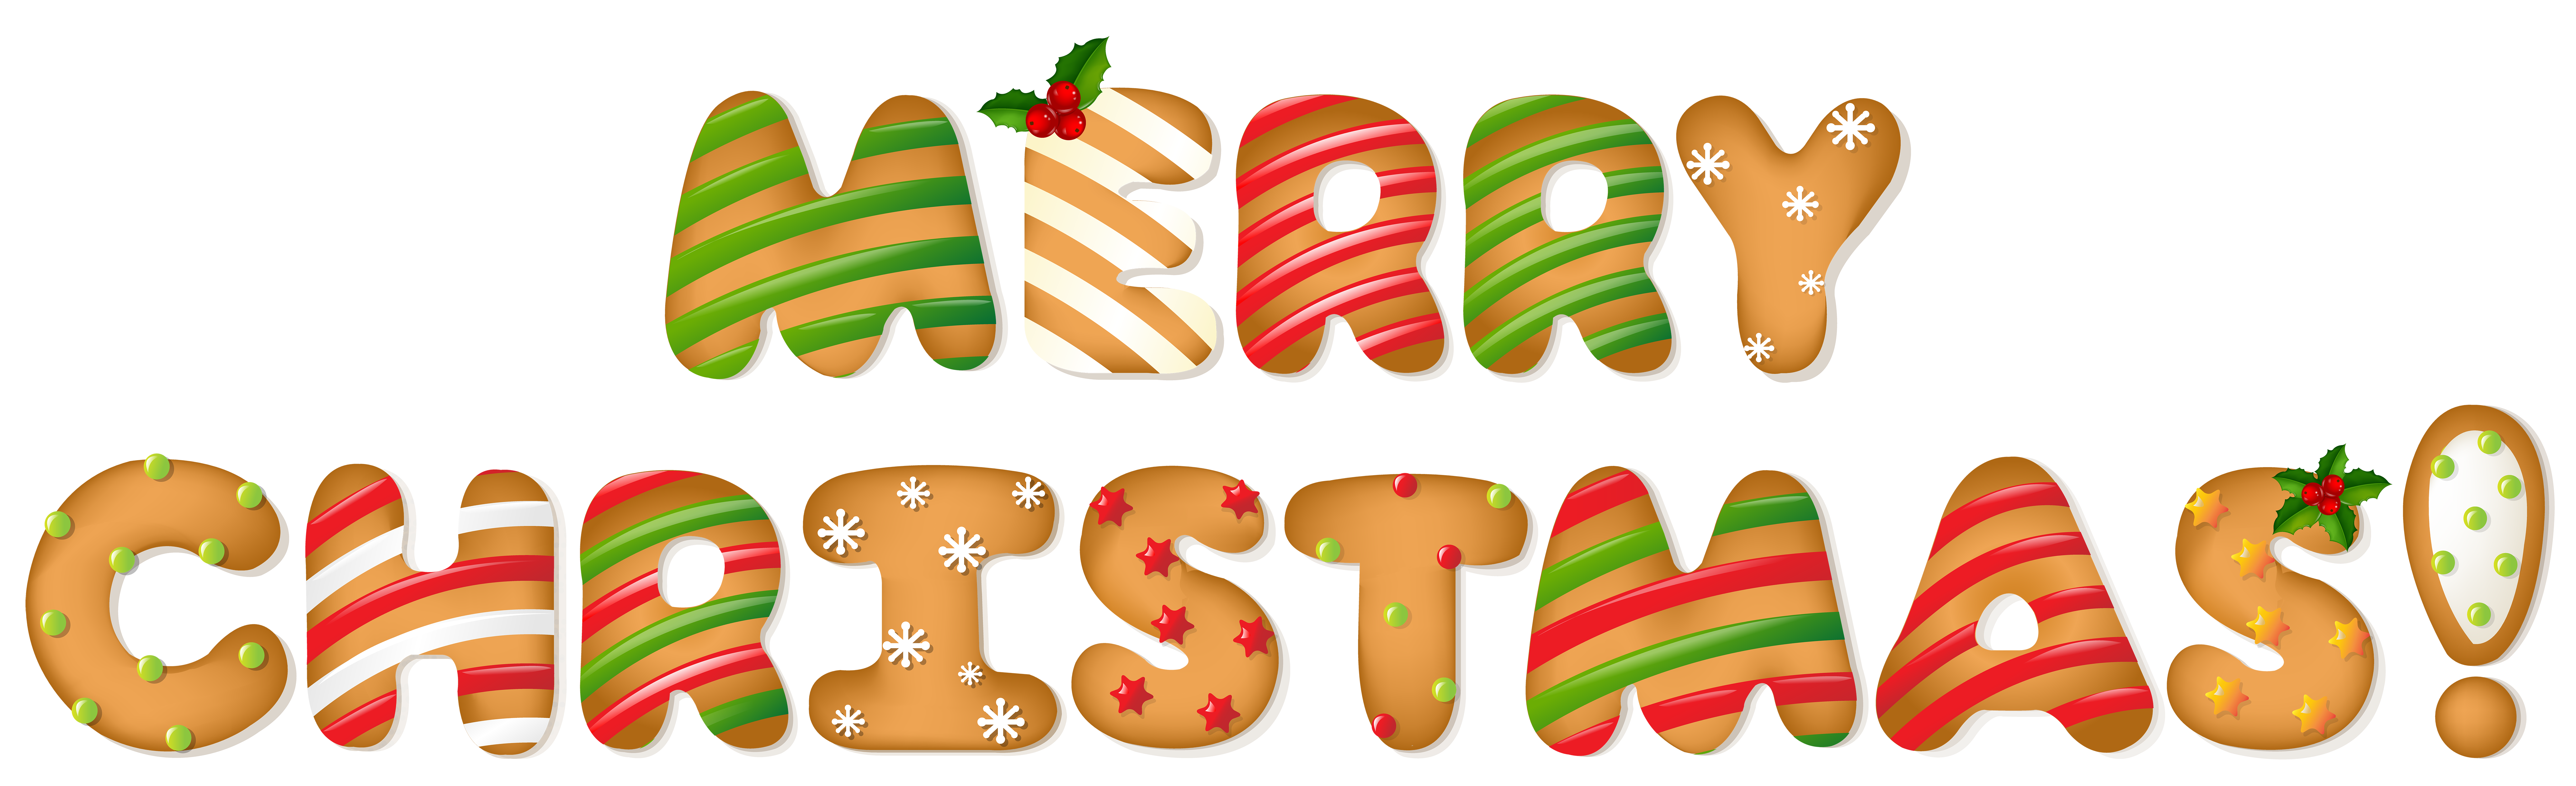 Merry Christmas Gingerbread Style PNG Clip Art Imageu200b Gallery 